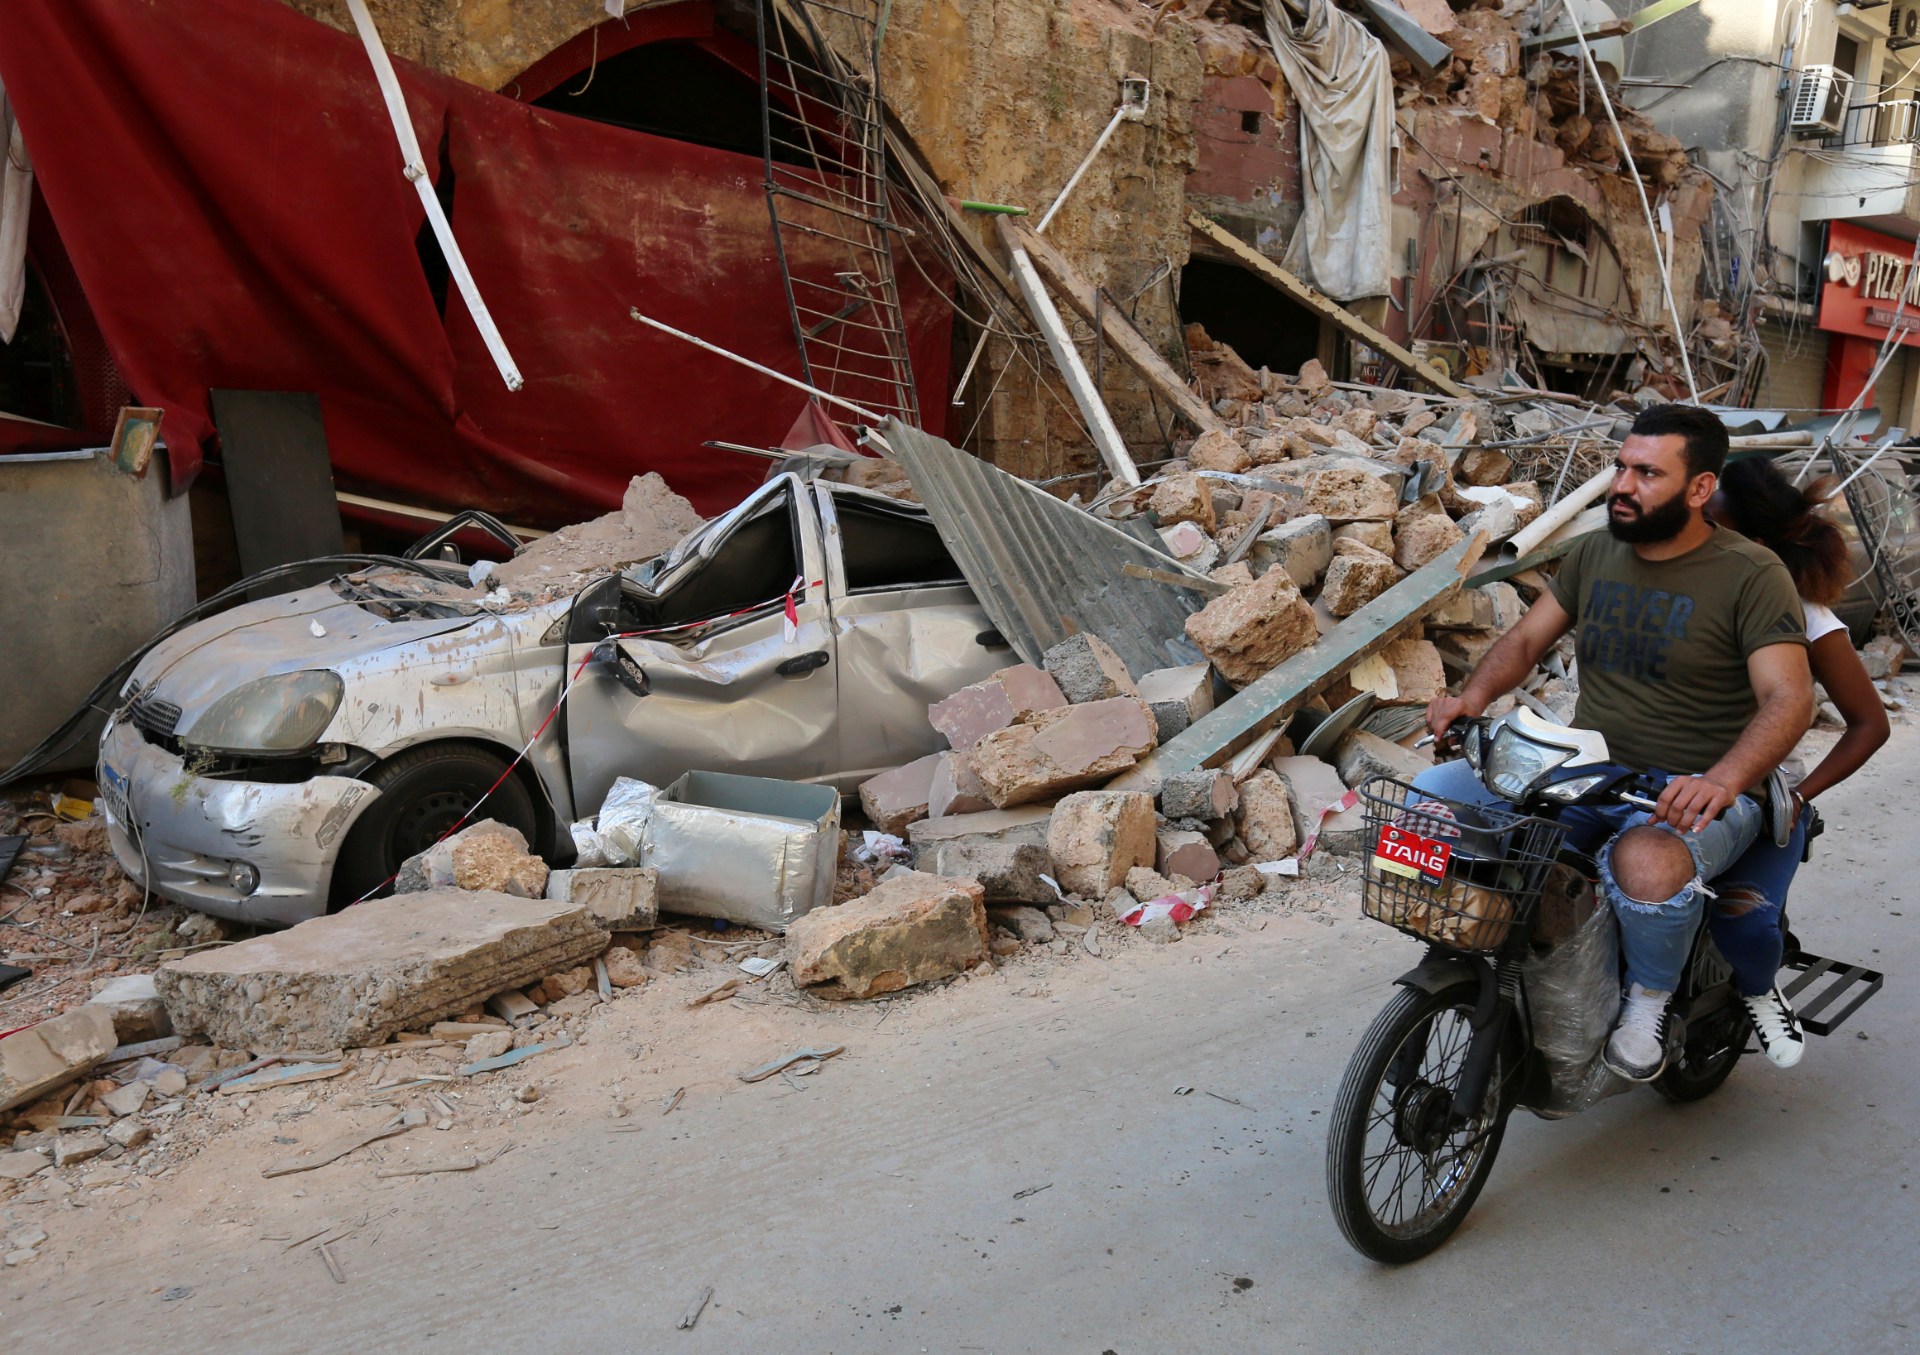 A man rides on a motorbike near rubble from damaged buildings in Gemmayzeh (Reuters)